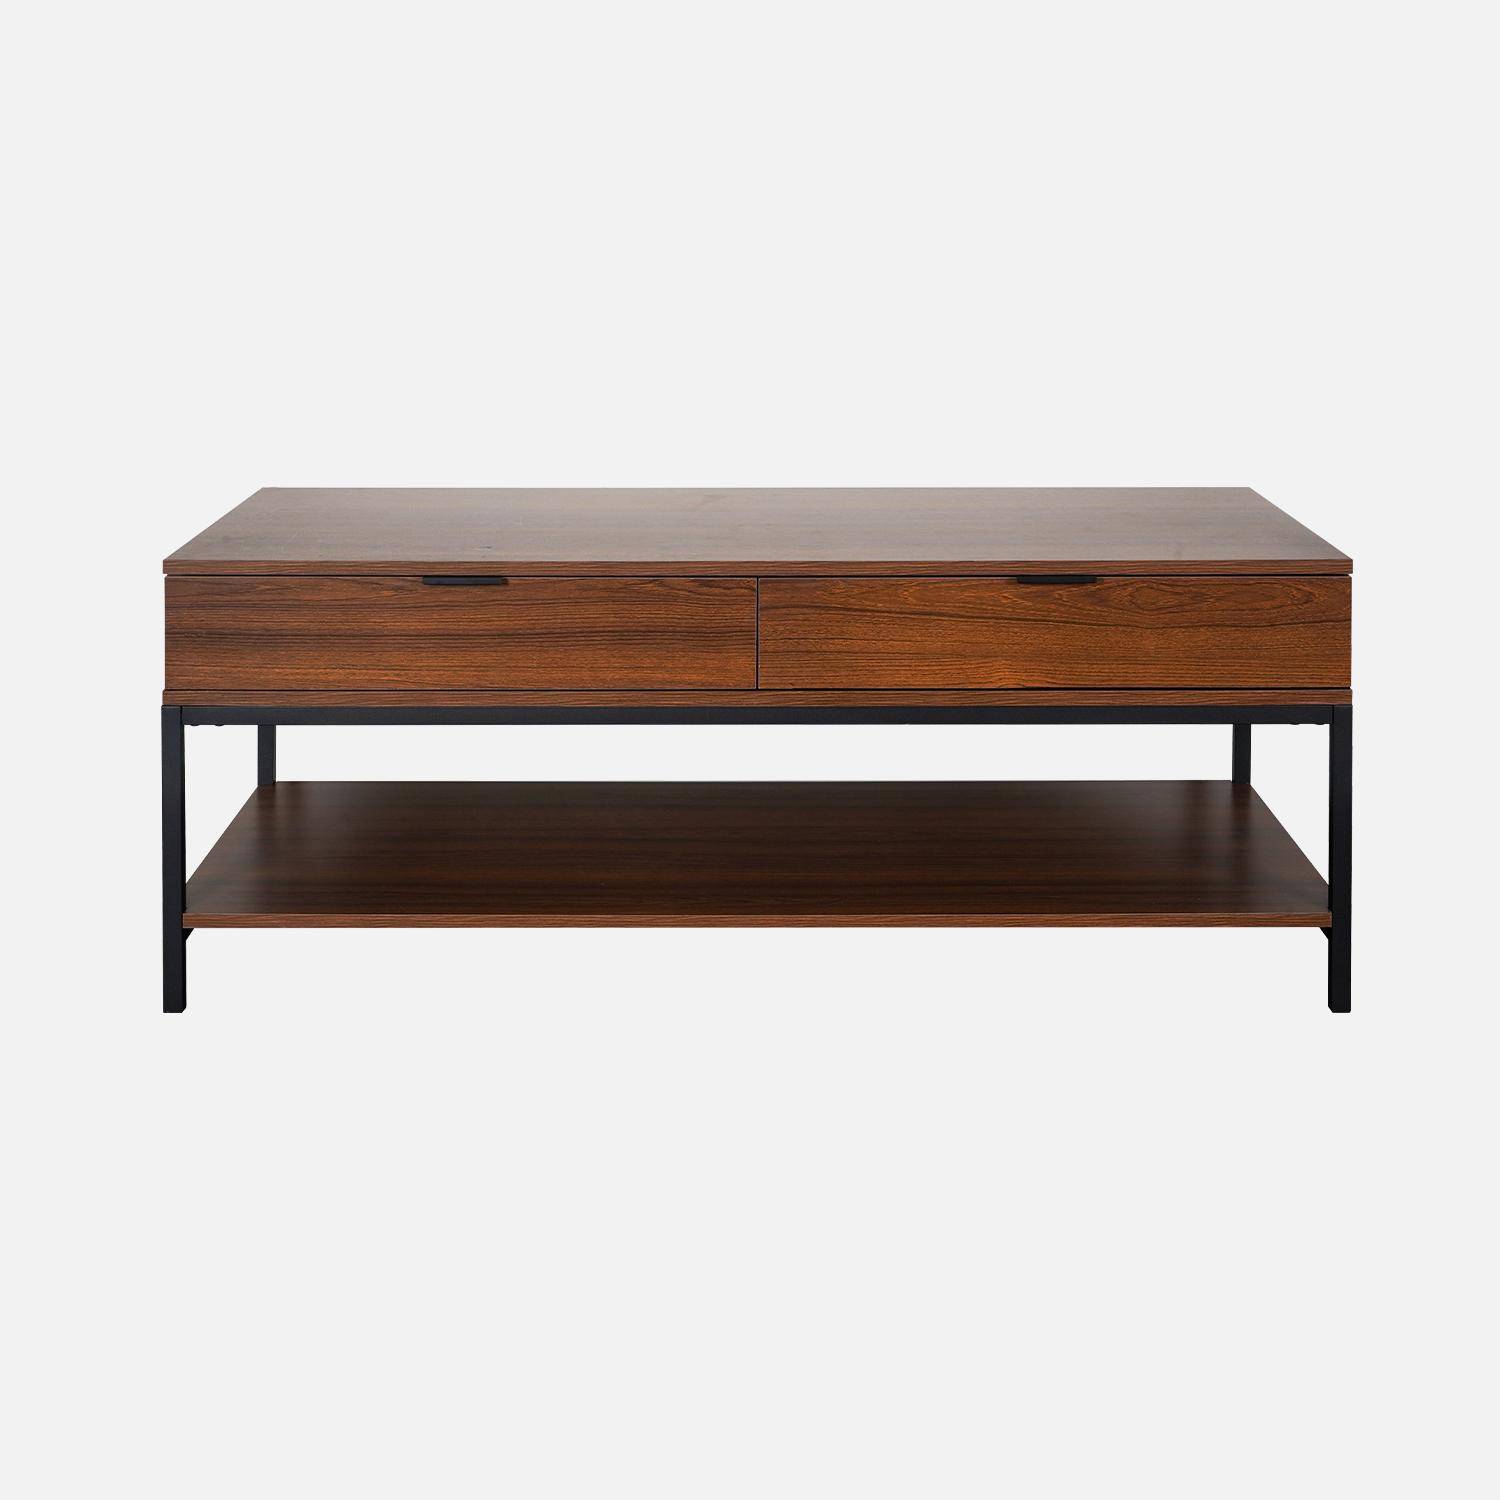 Walnut-coloured coffee table with black metal legs and handle - 2 drawers and 1 shelf Photo2